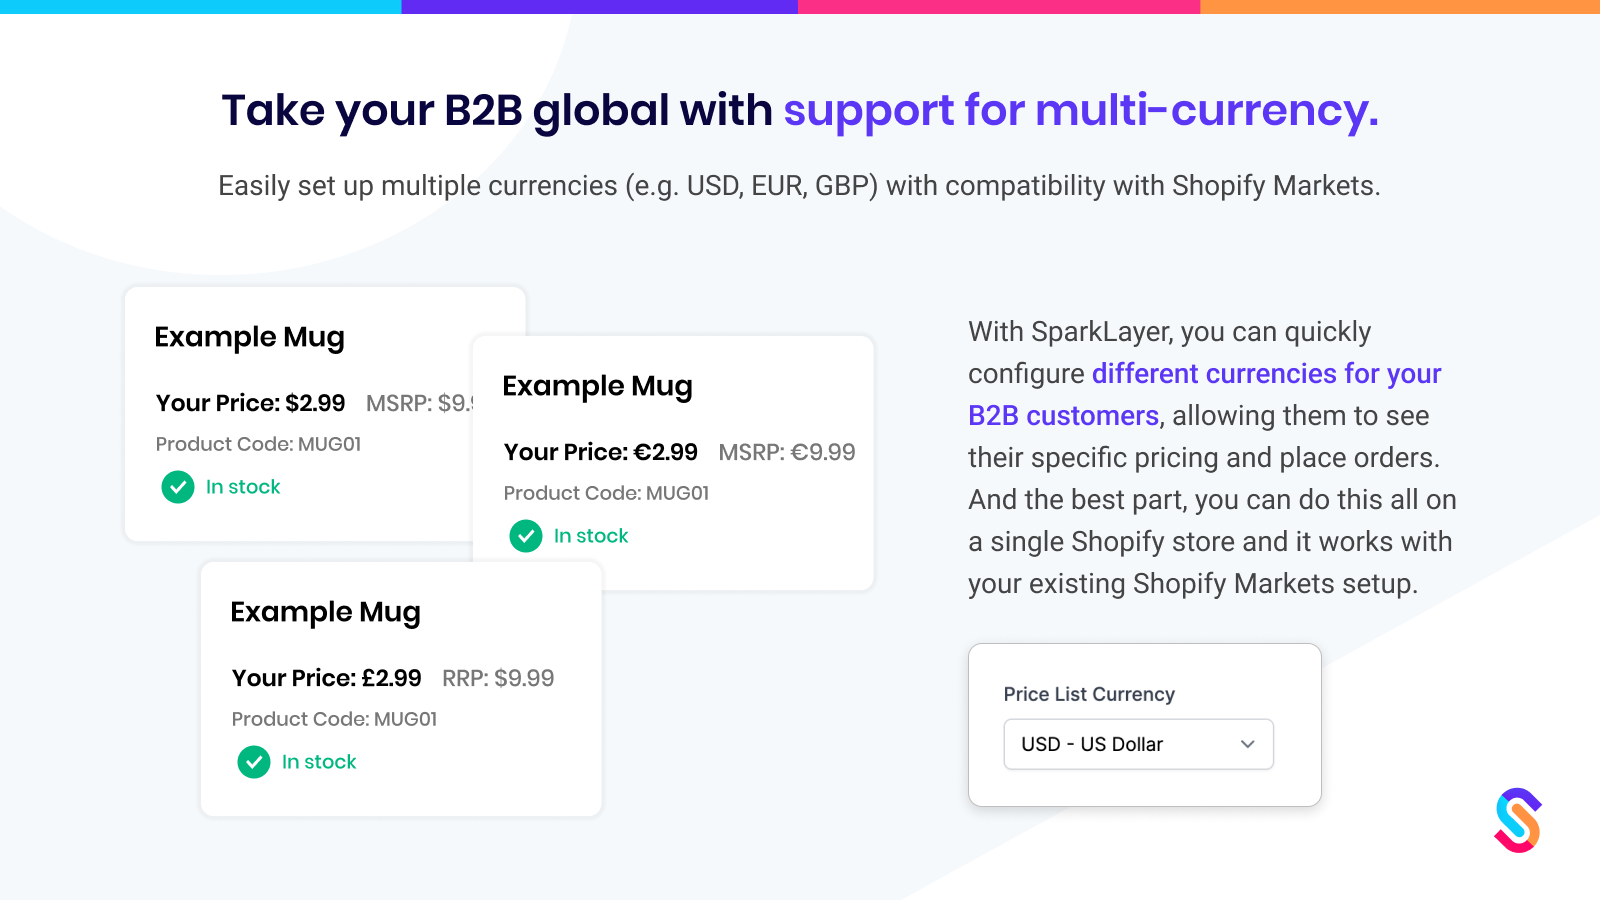 Take your B2B global with support for multi-currency.